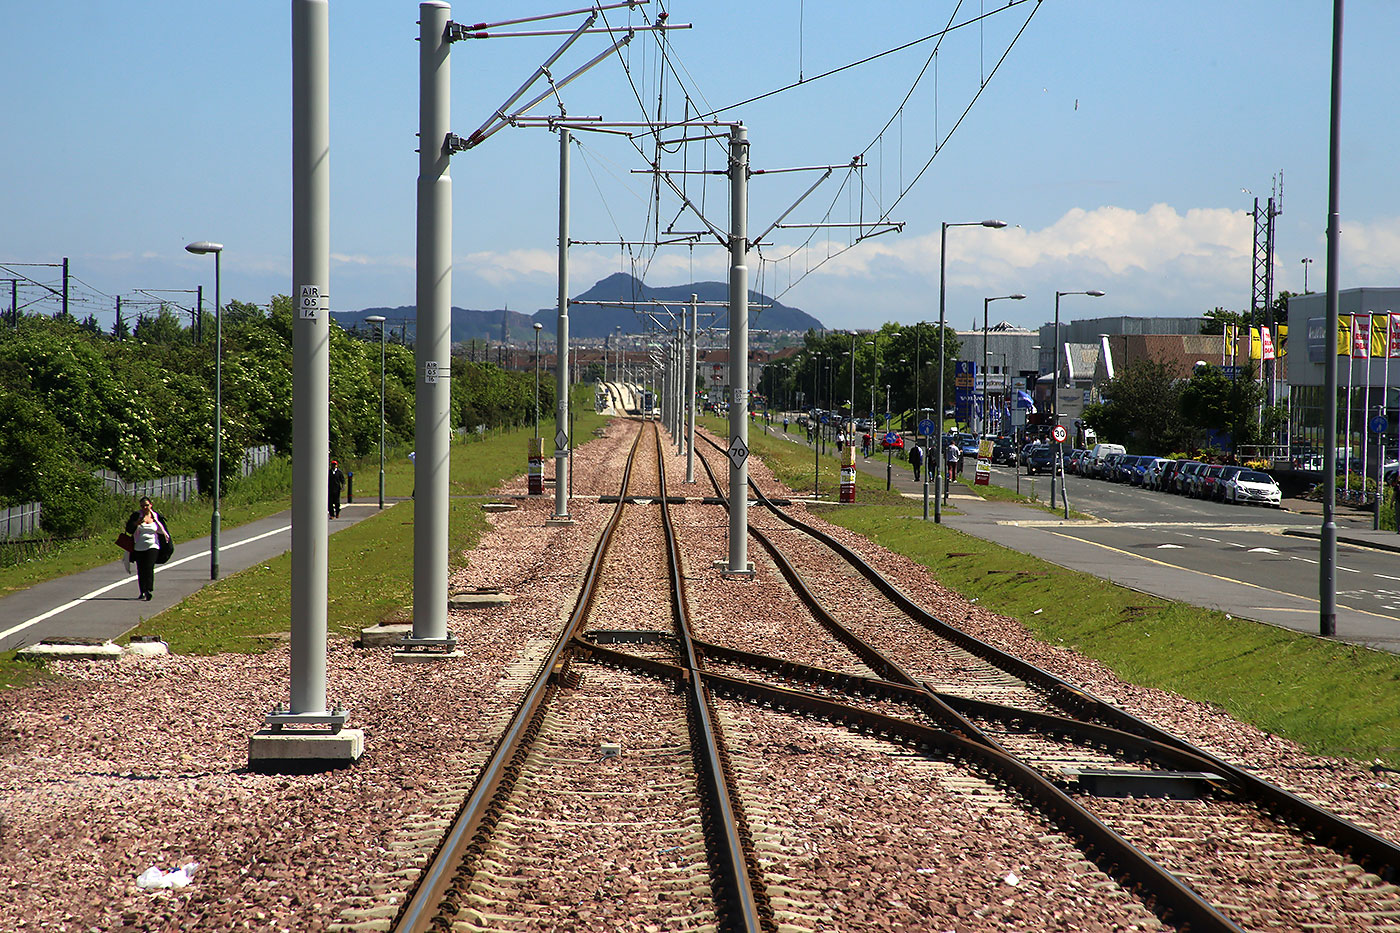 Edinburgh Tram Service  -  Looking towards Arthur Seat from the tram heading for York Place, after leaving the tram stop at Edinburgh Park Station  -  June 2014